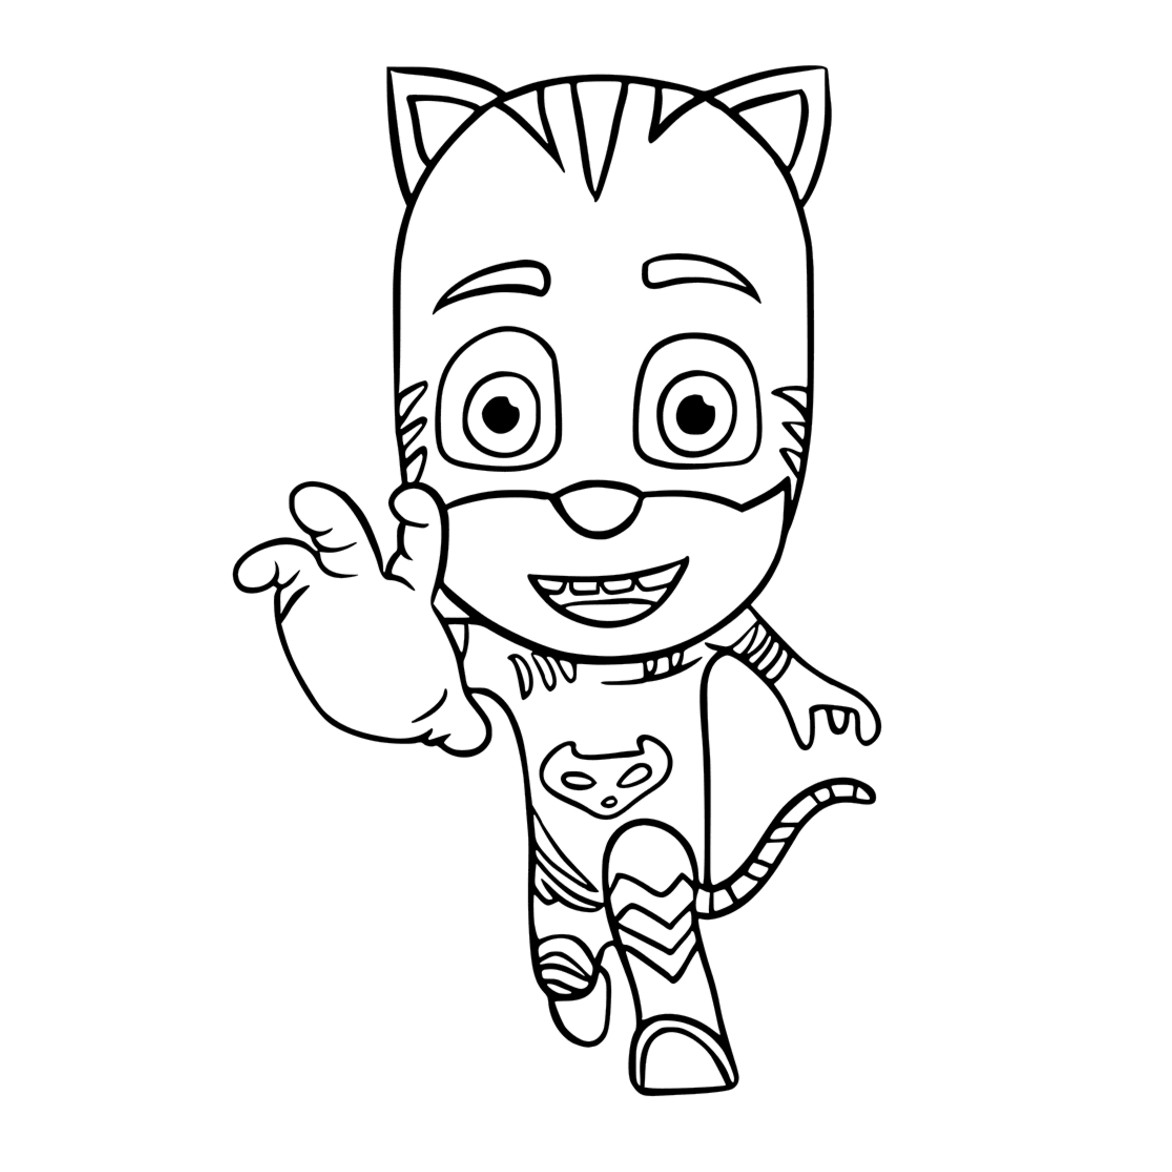 Pj Masks Coloring Pages Printable
 PJ Masks coloring pages to and print for free